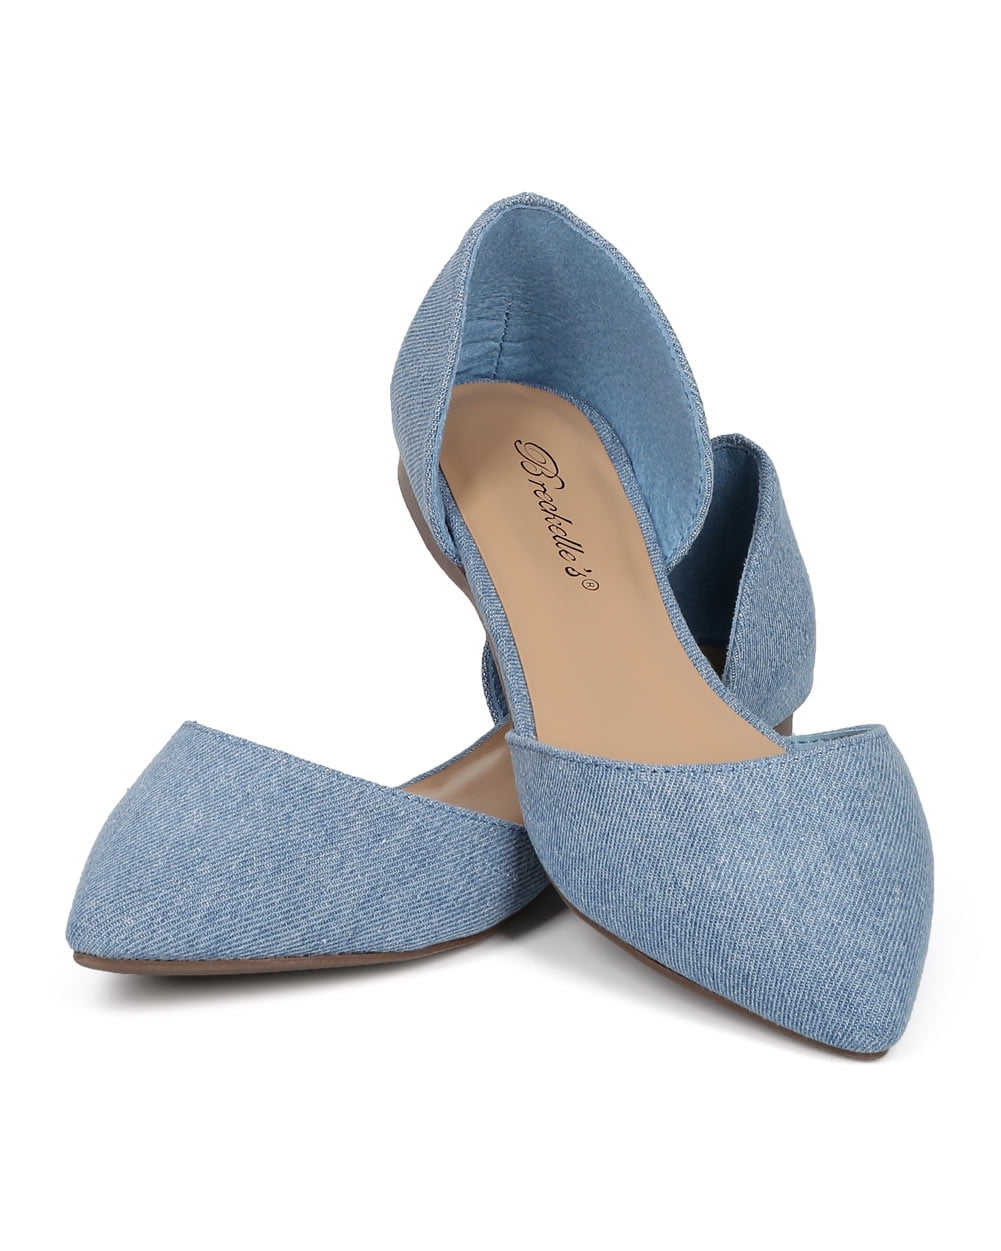 Breckelles - Breckelles Faux Leather D'Orsay Pointed Toe Blue Denim ...